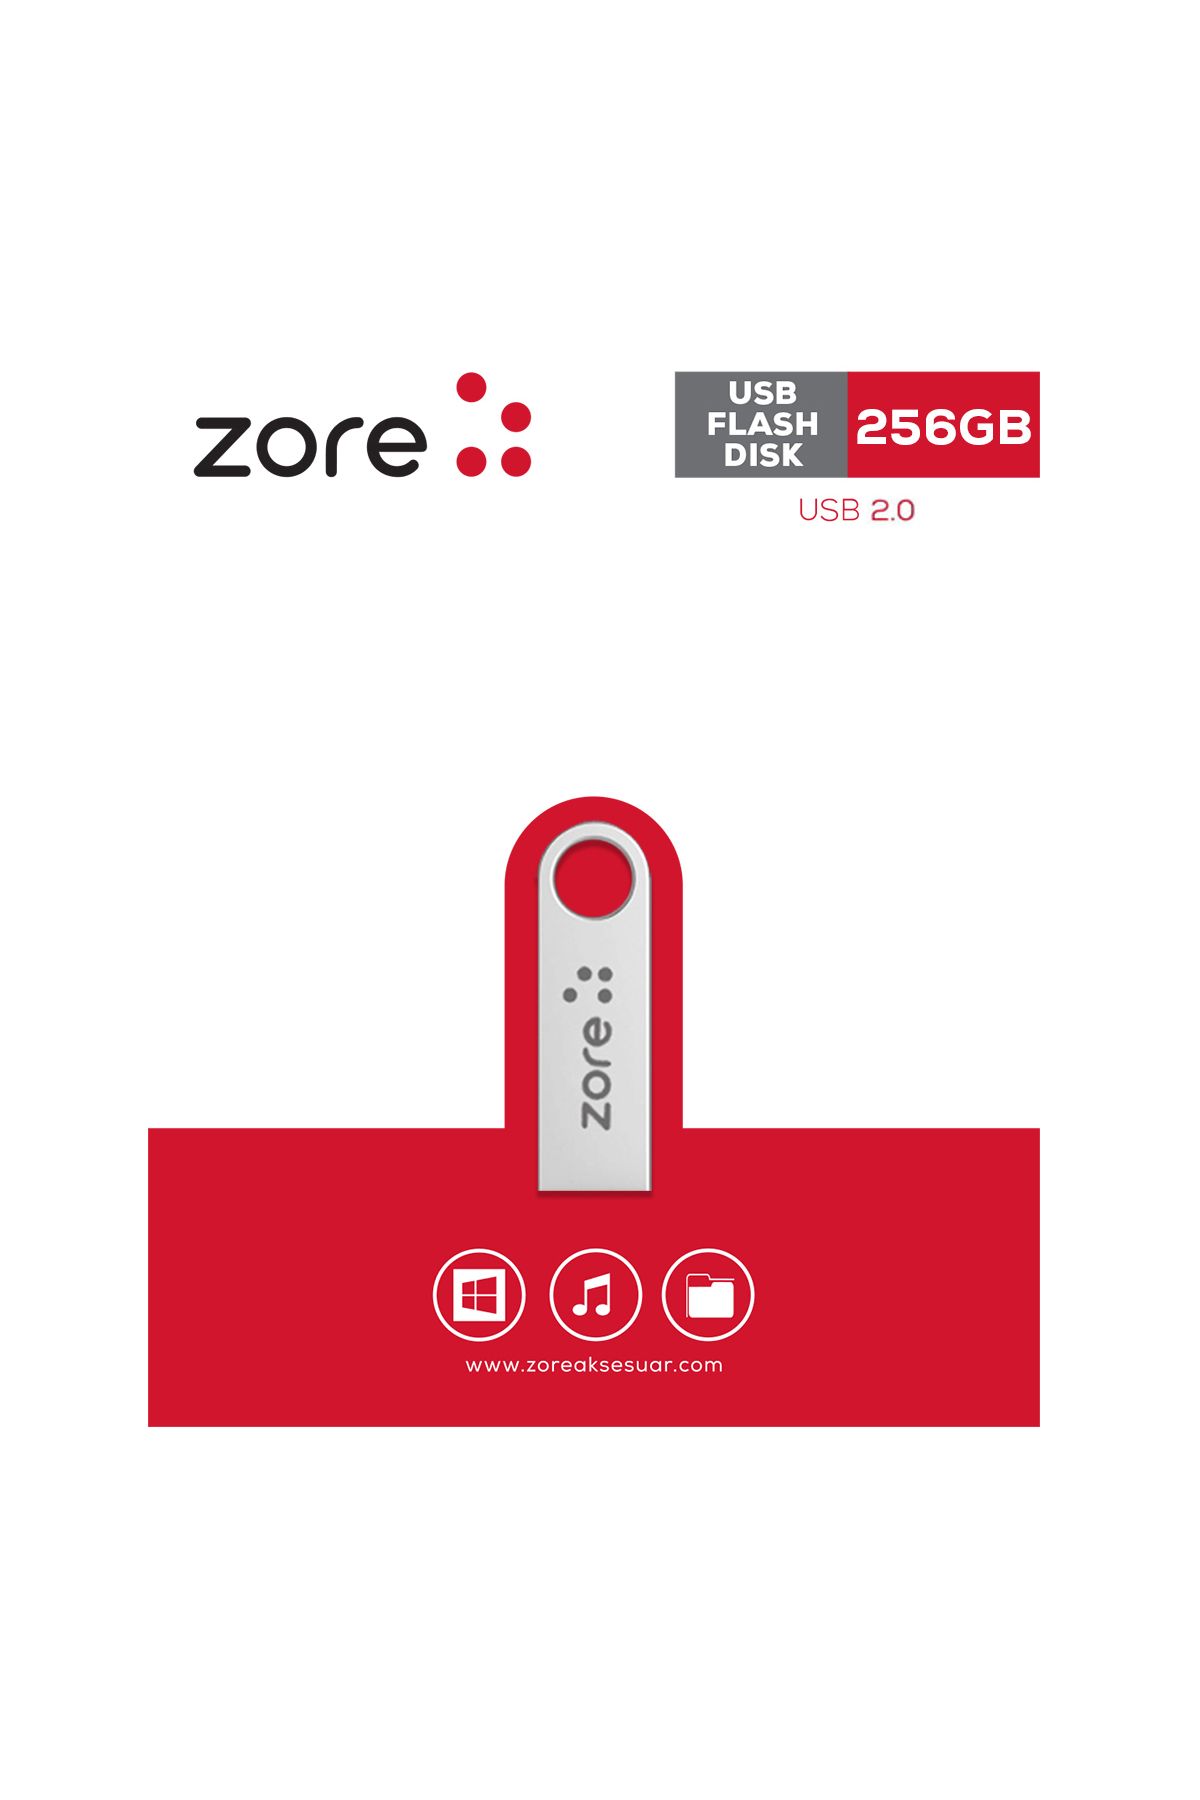 Zore USB FLASH DISK